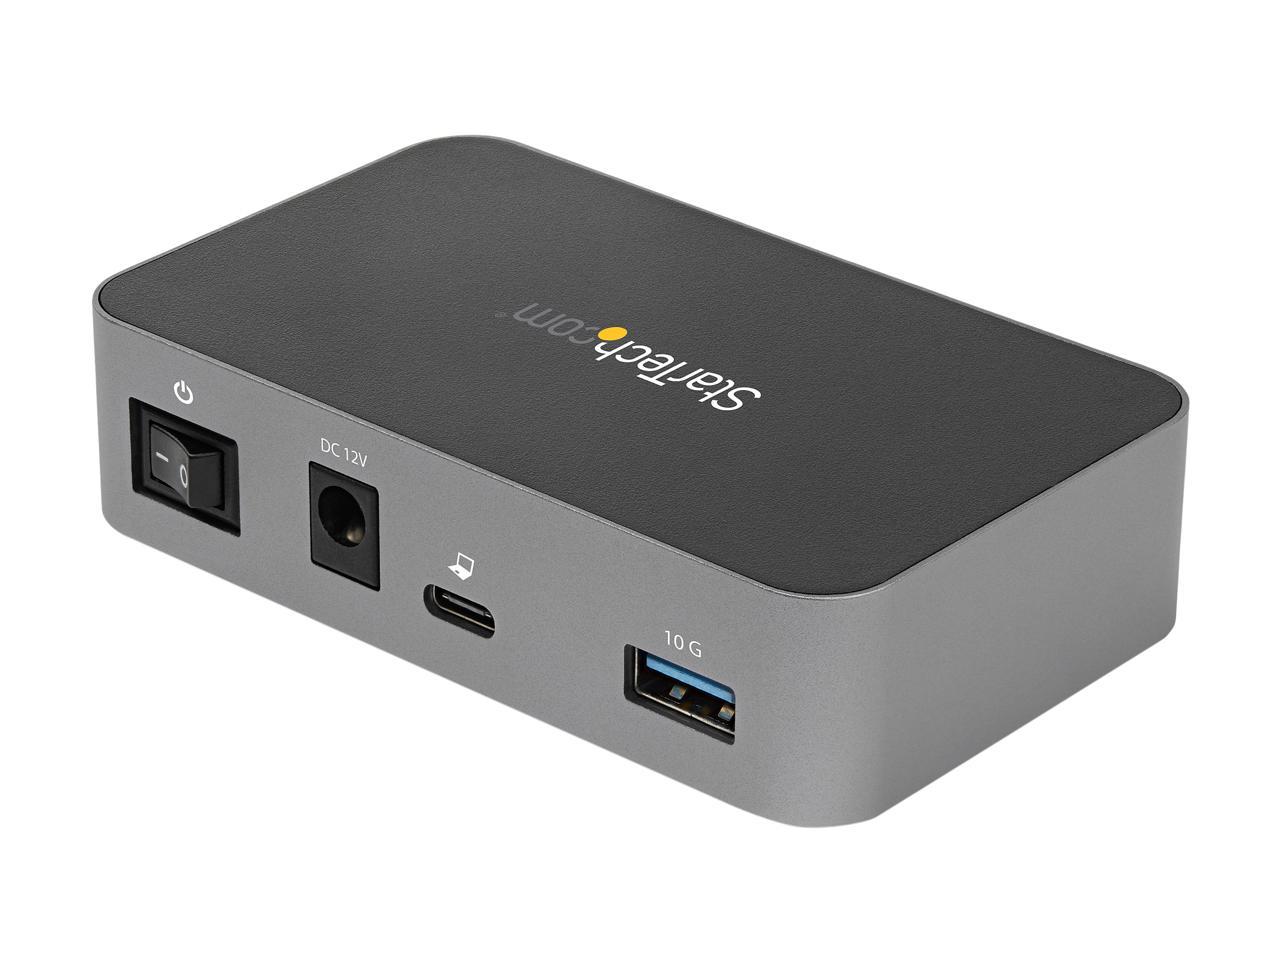 StarTech.com 4 Port USB C Hub with Power Adapter - USB 3.2 Gen 2 (10Gbps) - USB Type C to 4x USB-A - Self Powered Desktop USB Hub with Fast Charging Port (BC 1.2) - Desk Mountable - image 5 of 5